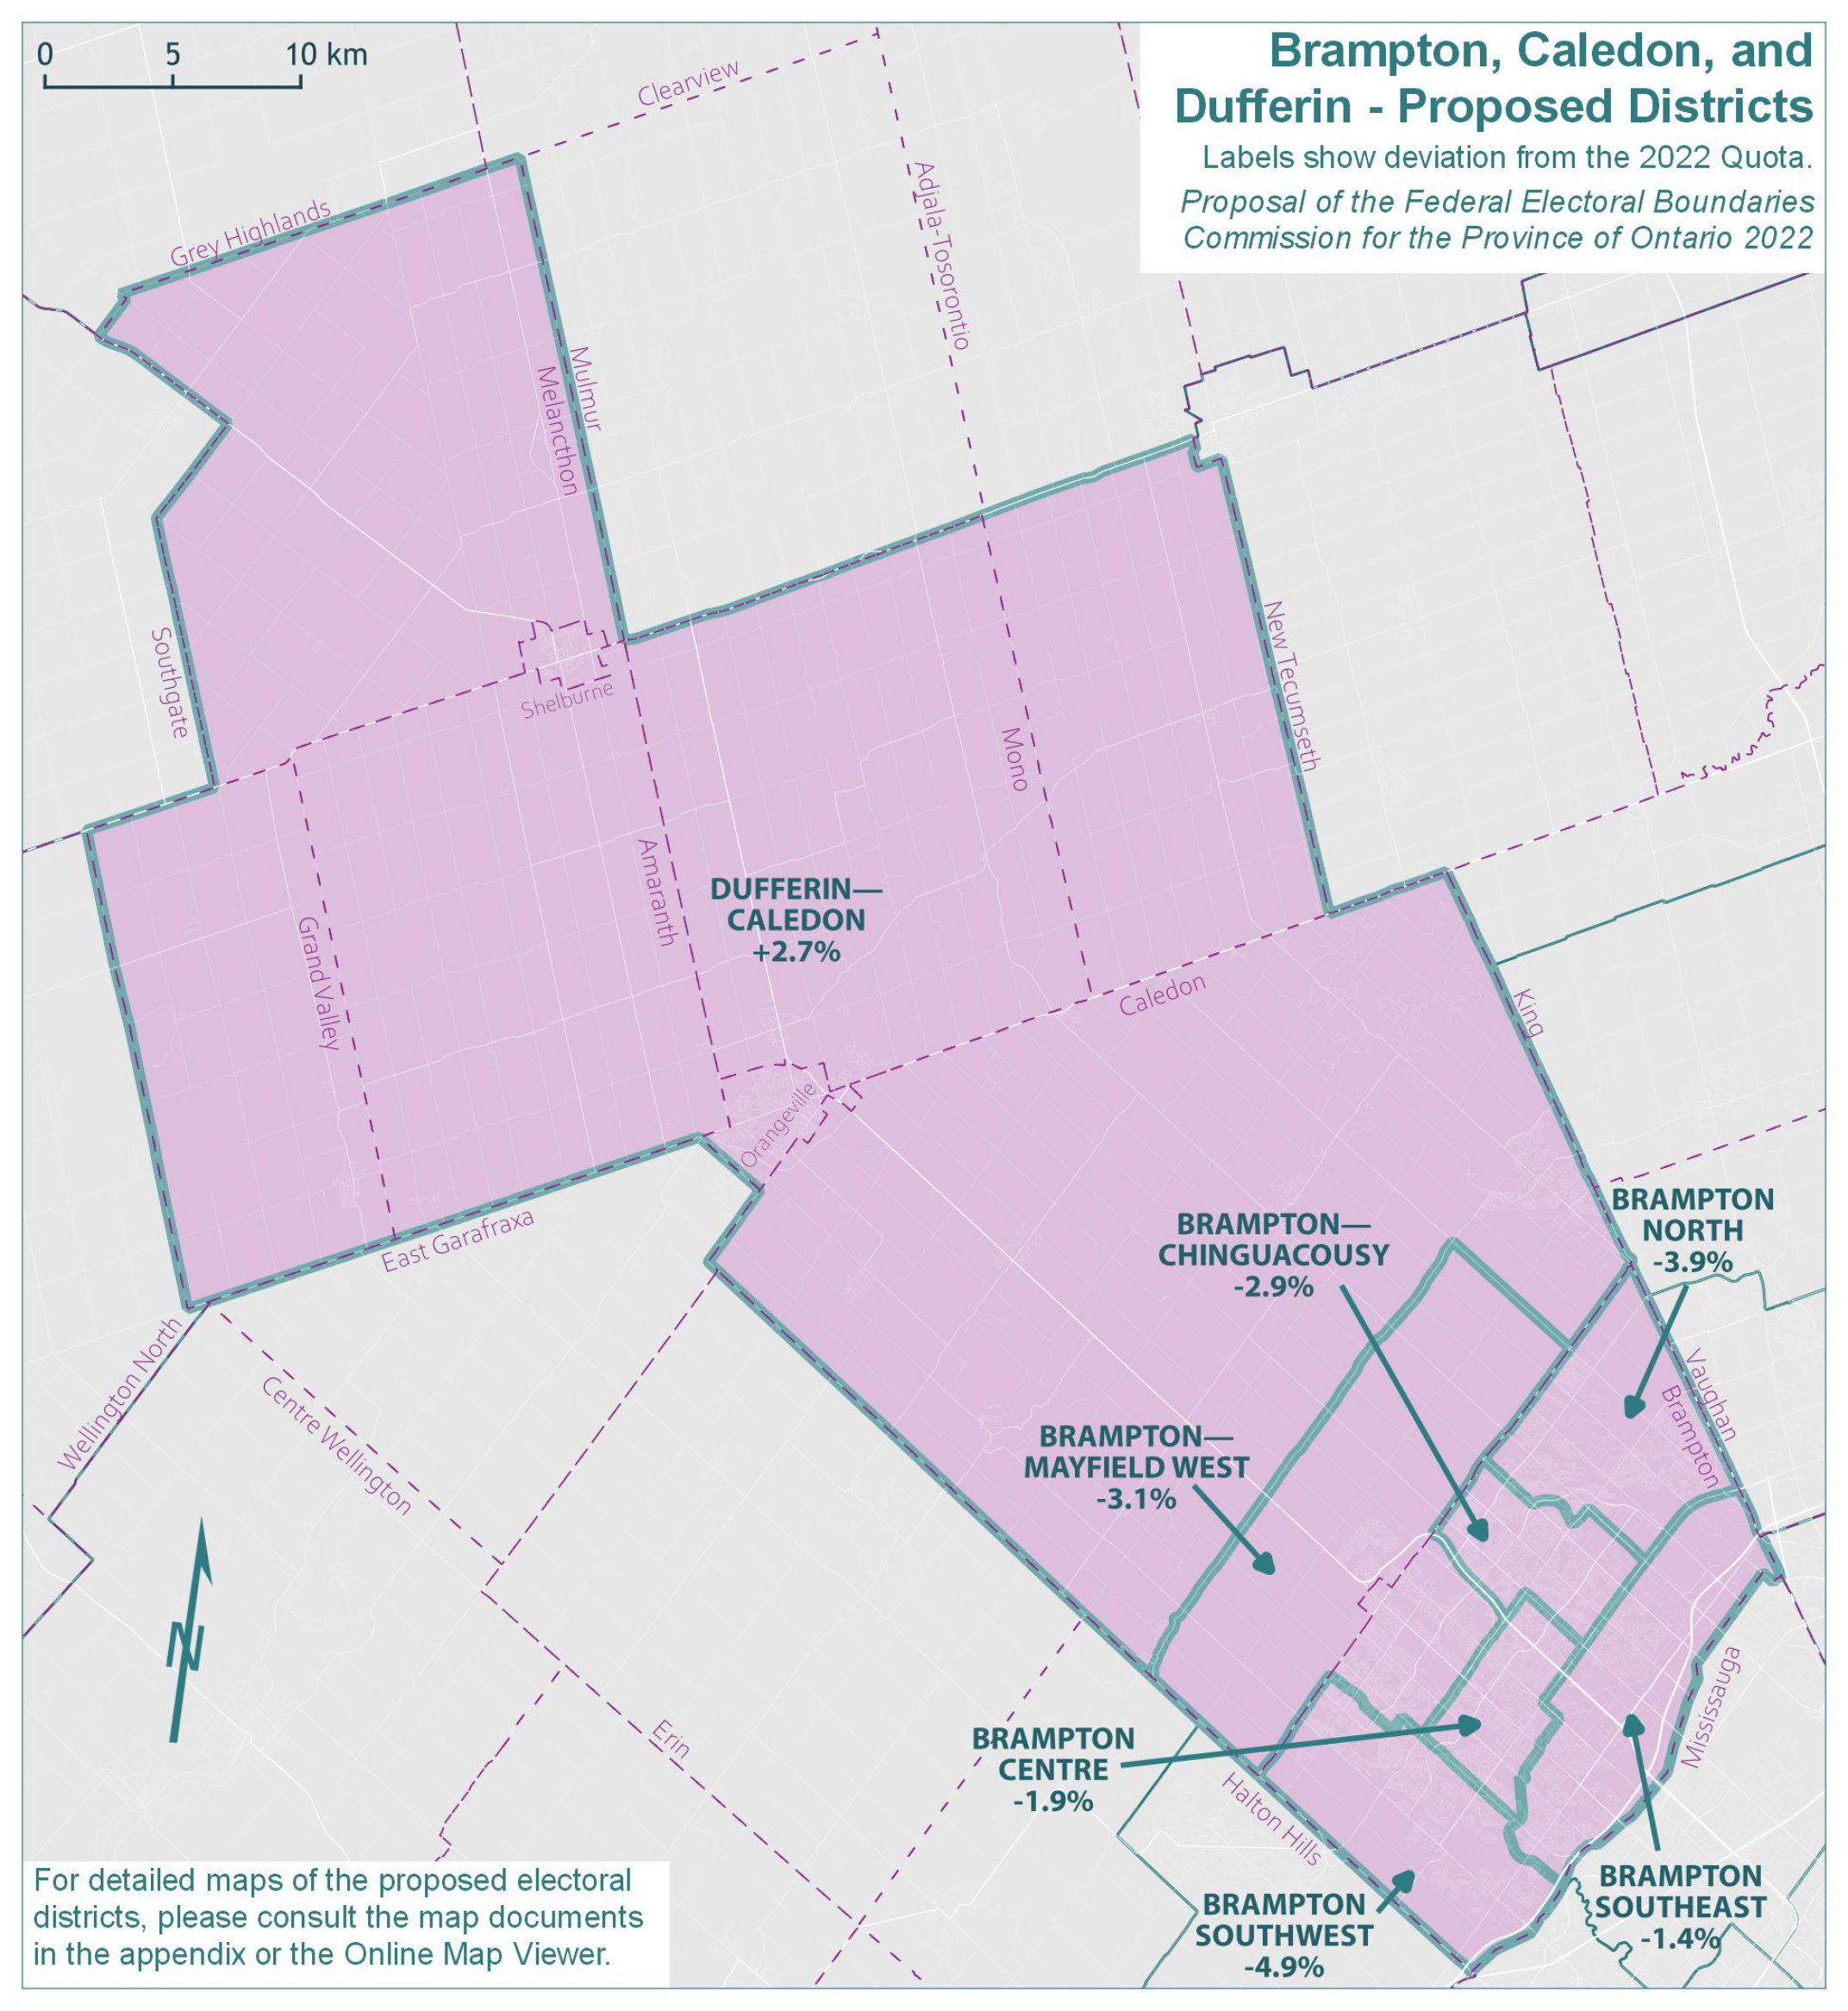 Brampton, Caledon, and Dufferin - Proposed Districts 